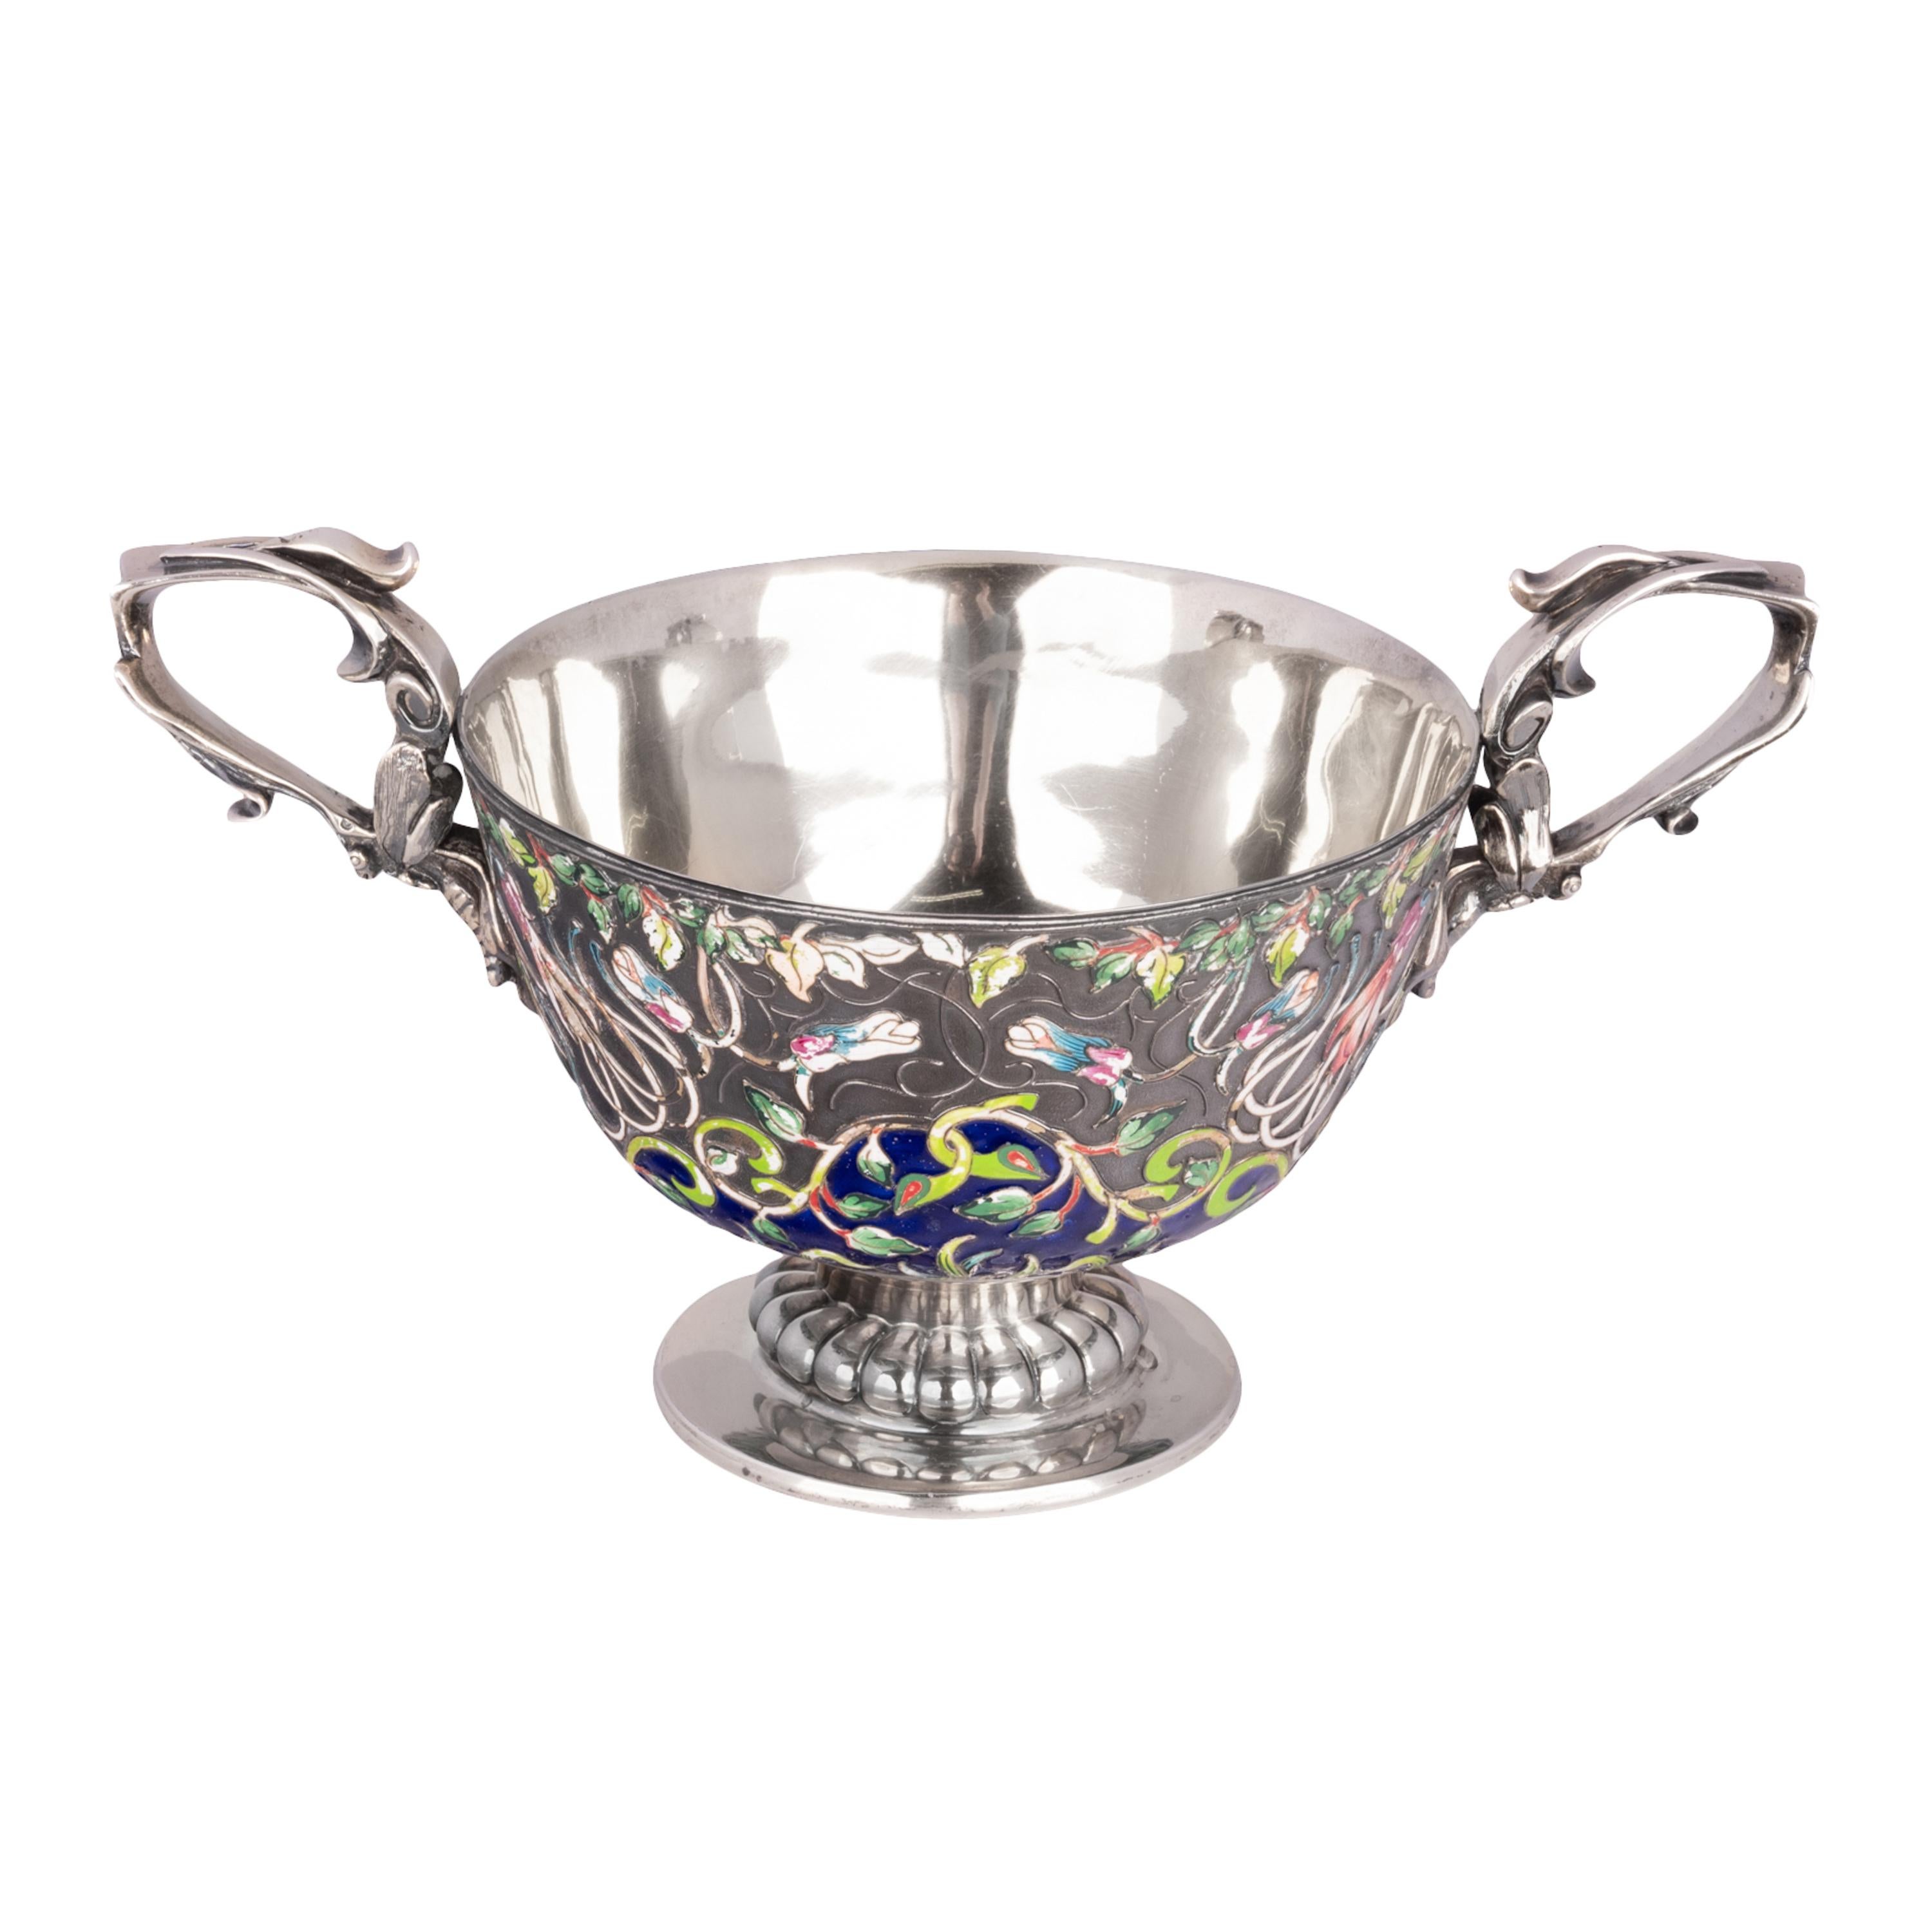 A large antique Imlerial Russian twin handled silver cloisonne bowl, Pavel Ovchinnikov, Moscow, 1898. Silver weight 24.5 oz (695 grams).
Ovchinnikov is recognized as one of Russia's most famous enamellers, he produced incredible objects to rival the